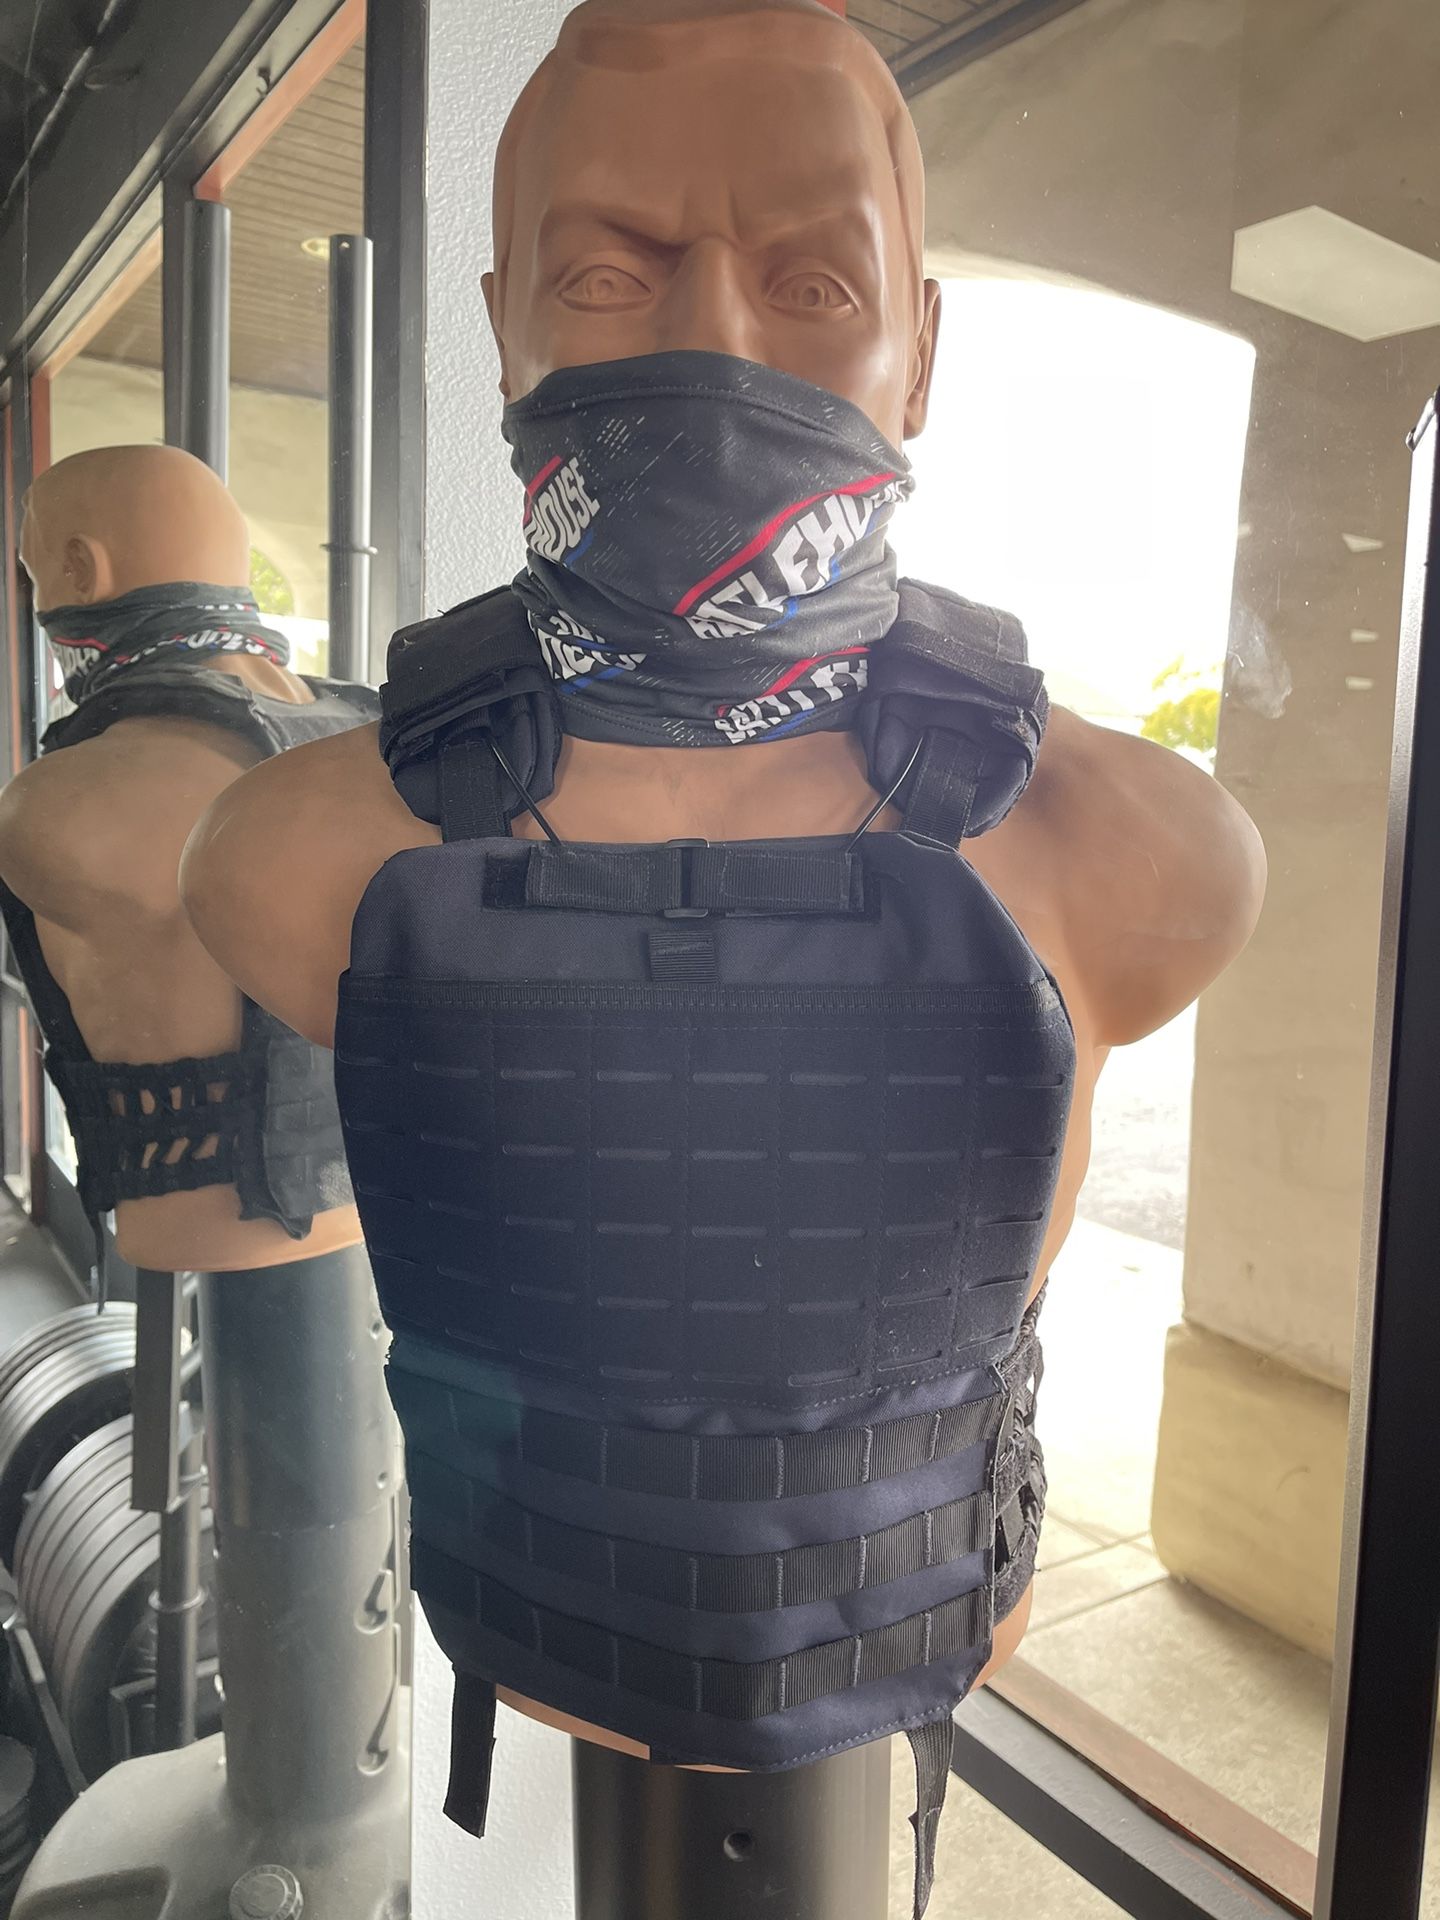 TRAINING WEIGHT VEST🔹SPORTS FITNESS GYM EQUIPMENT 